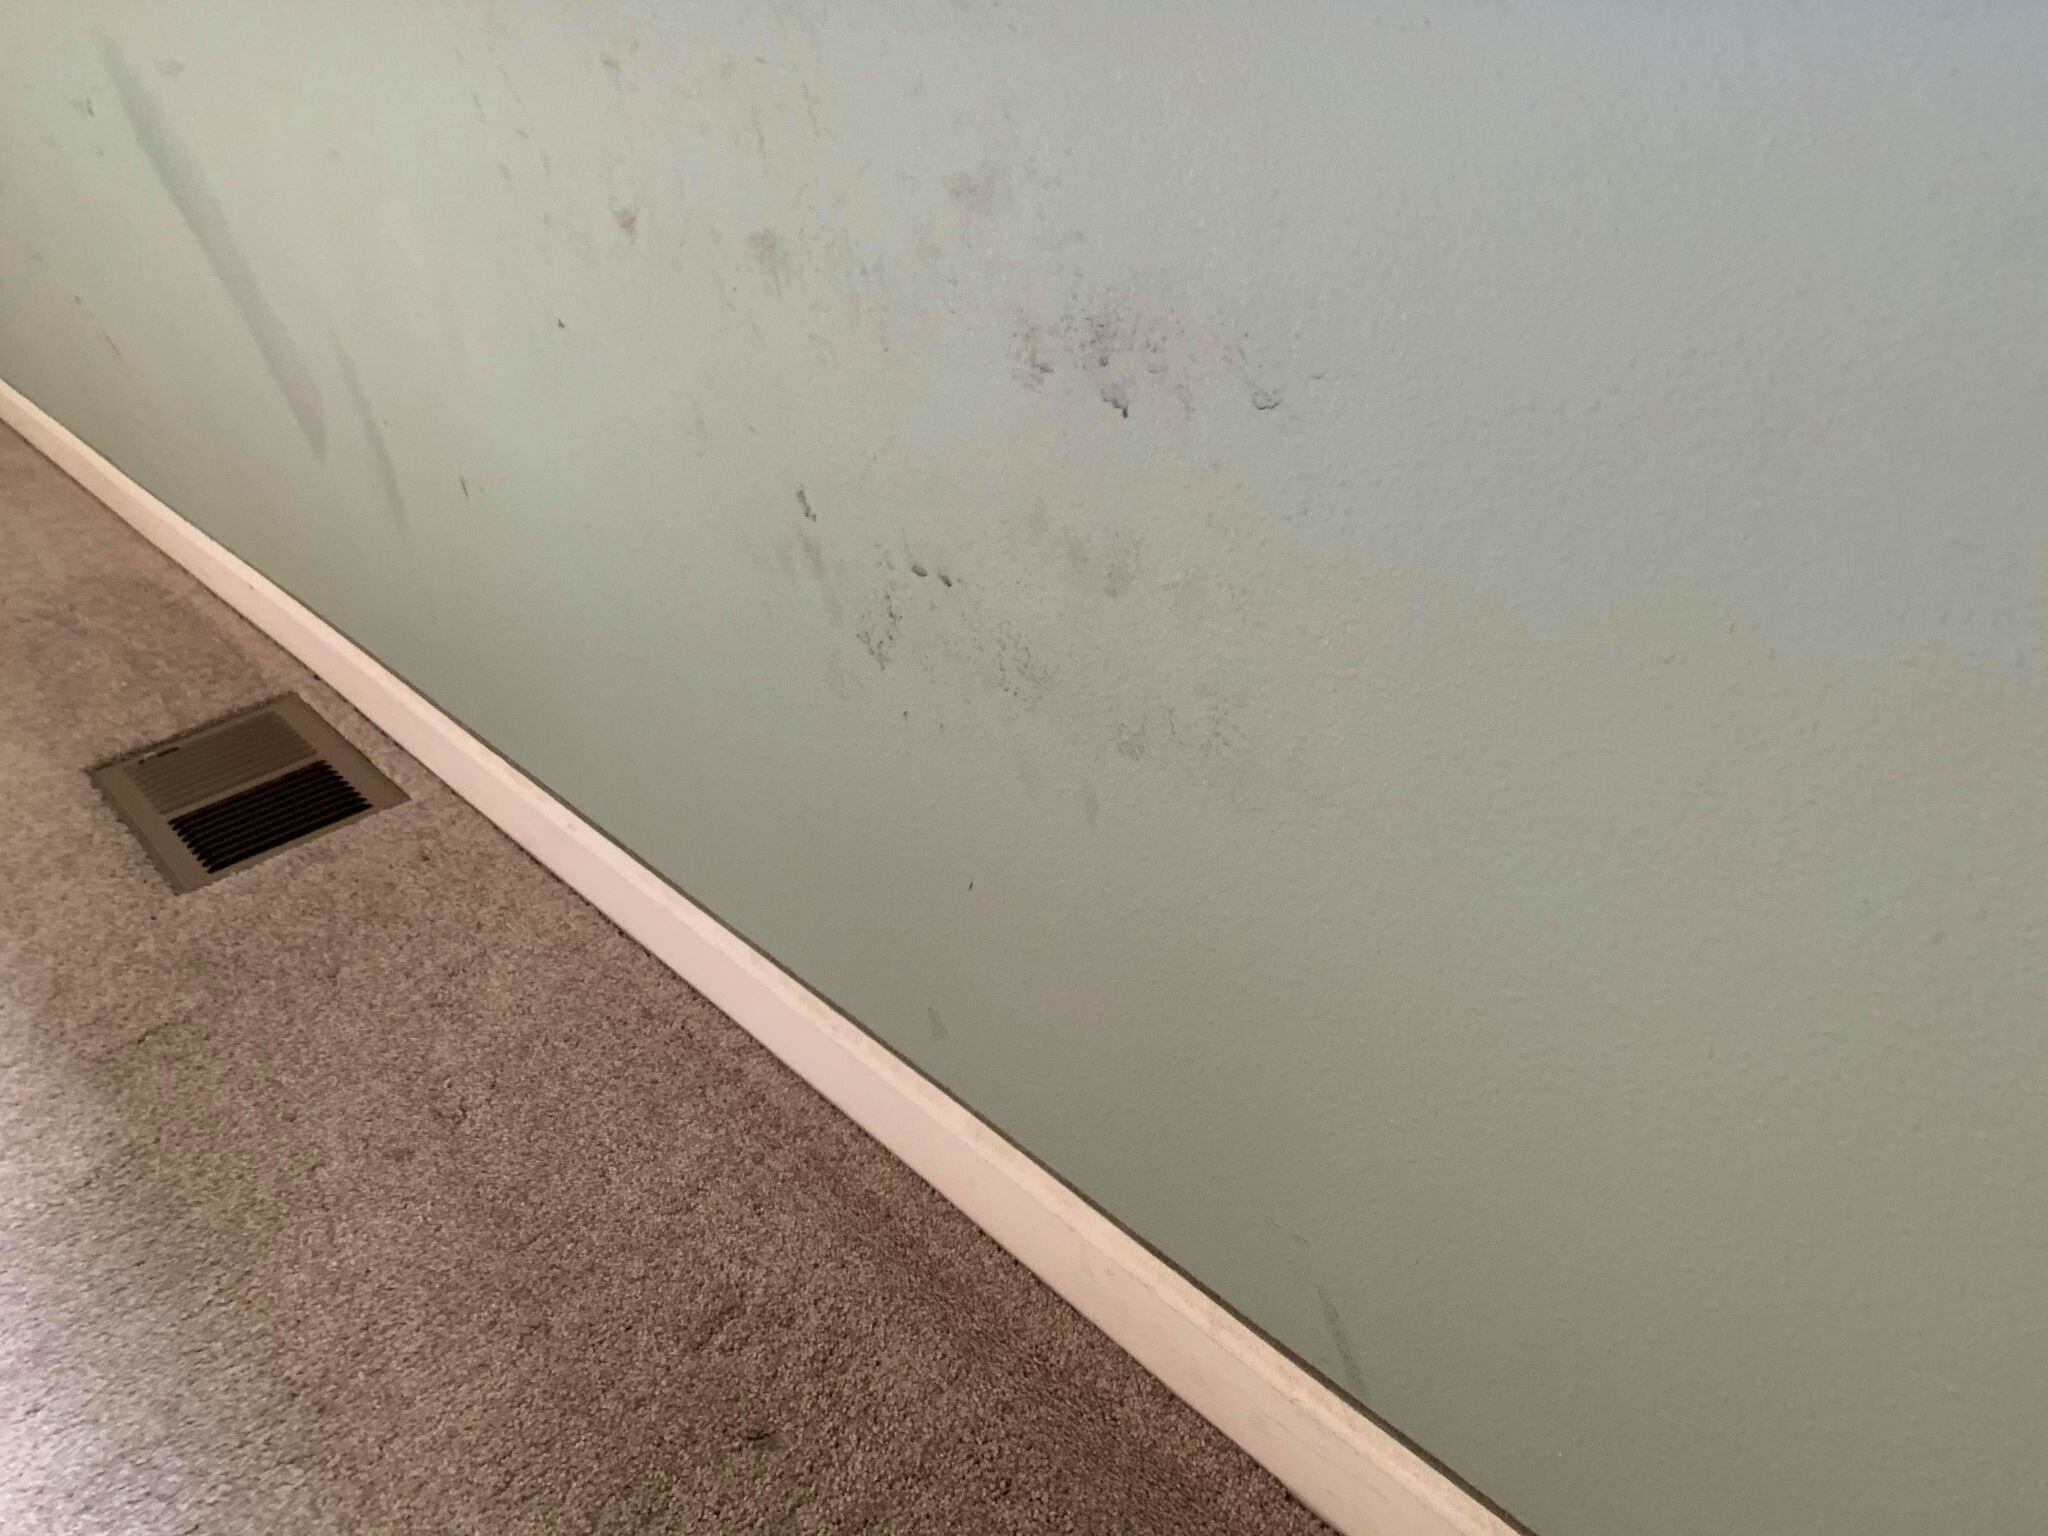  We clean walls during detail cleans!  If you’re our routine customer we will do our best to keep your walls scuff free during your regular appointments.  If we see it, we wipe it! 